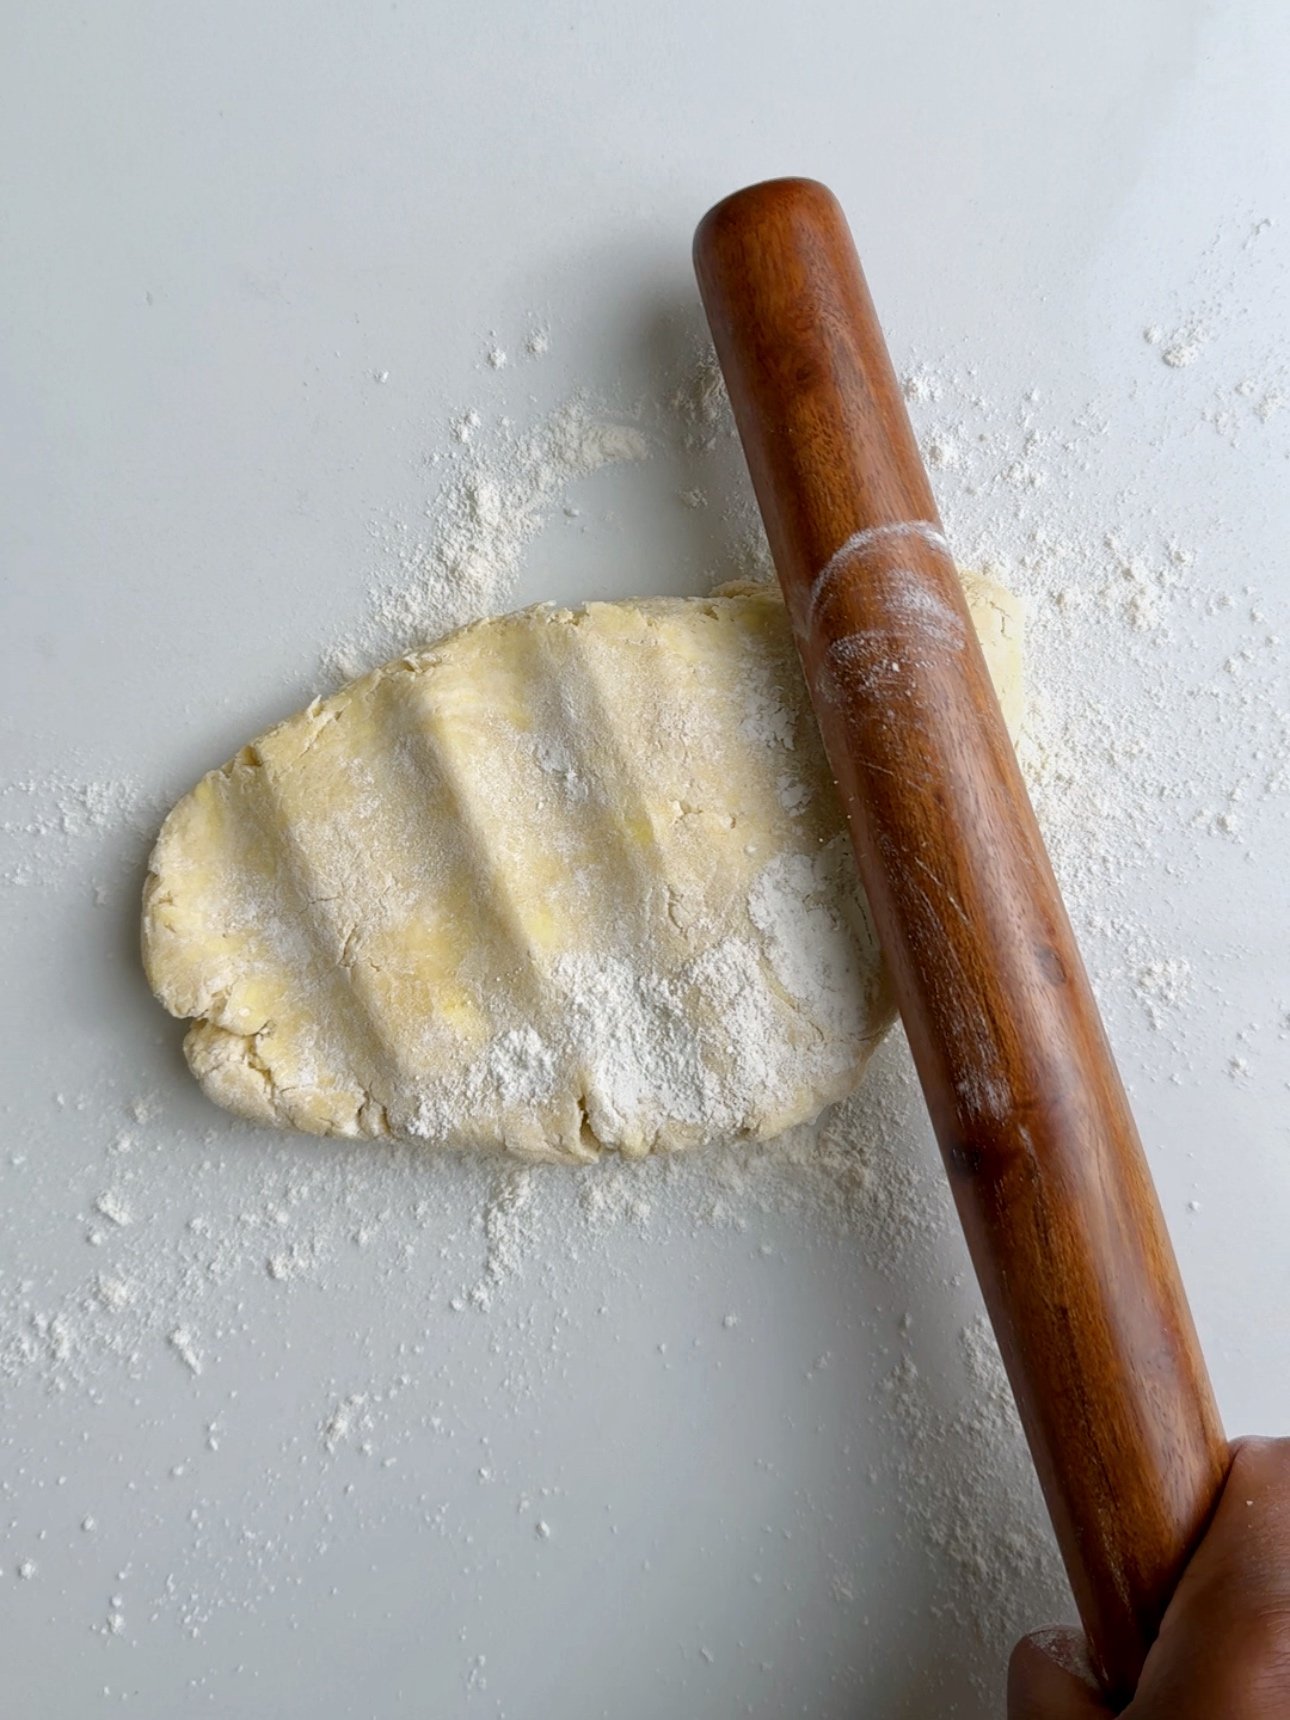 Tapping pastry dough with a rolling pin